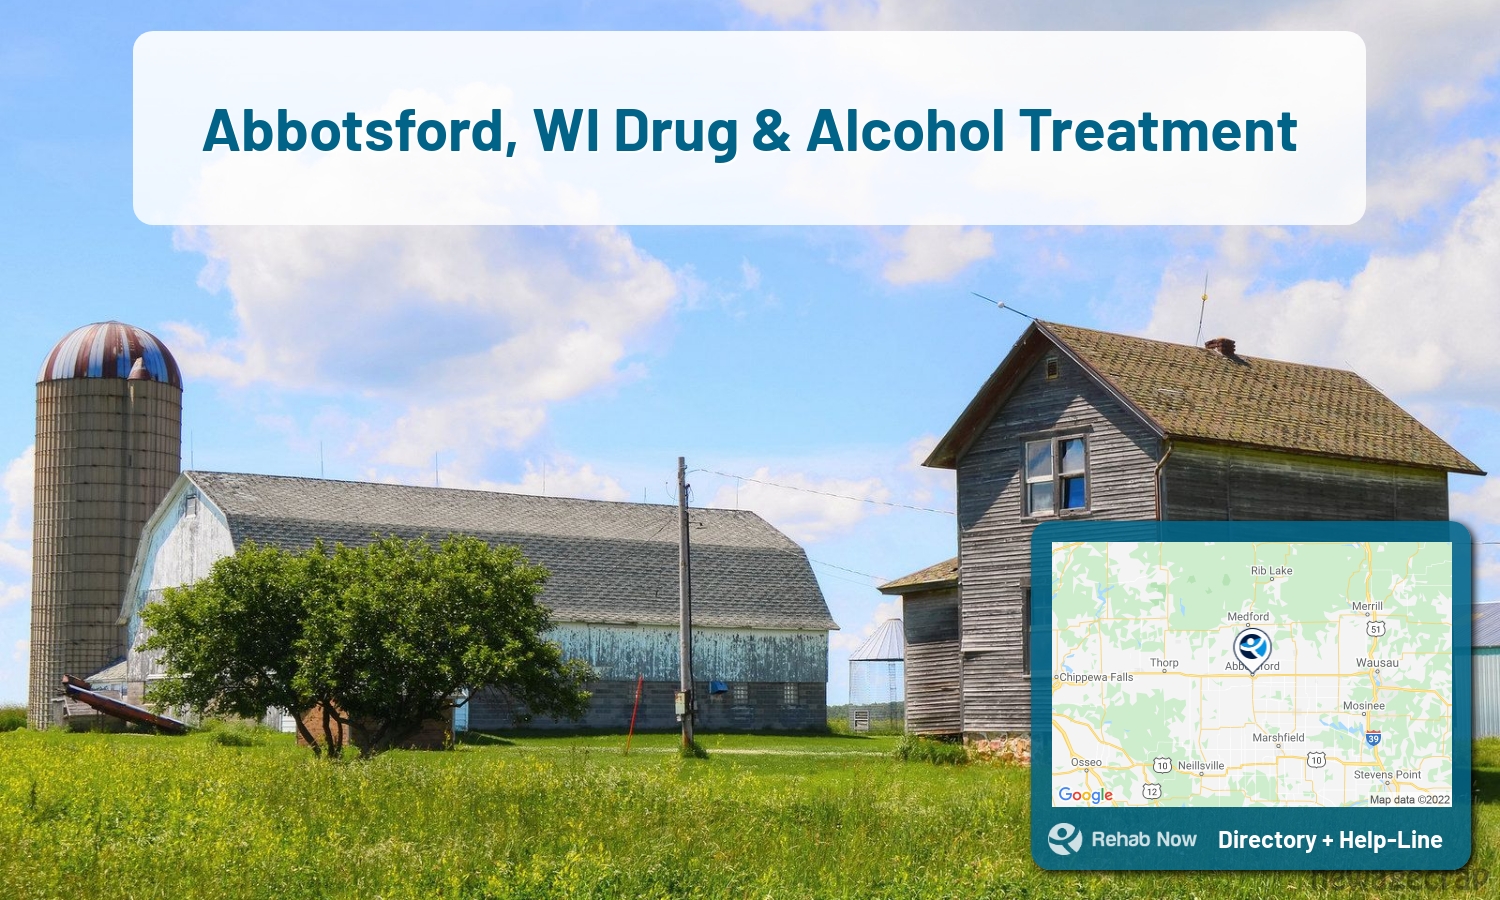 Drug rehab and alcohol treatment services nearby Abbotsford, WI. Need help choosing a treatment program? Call our free hotline!